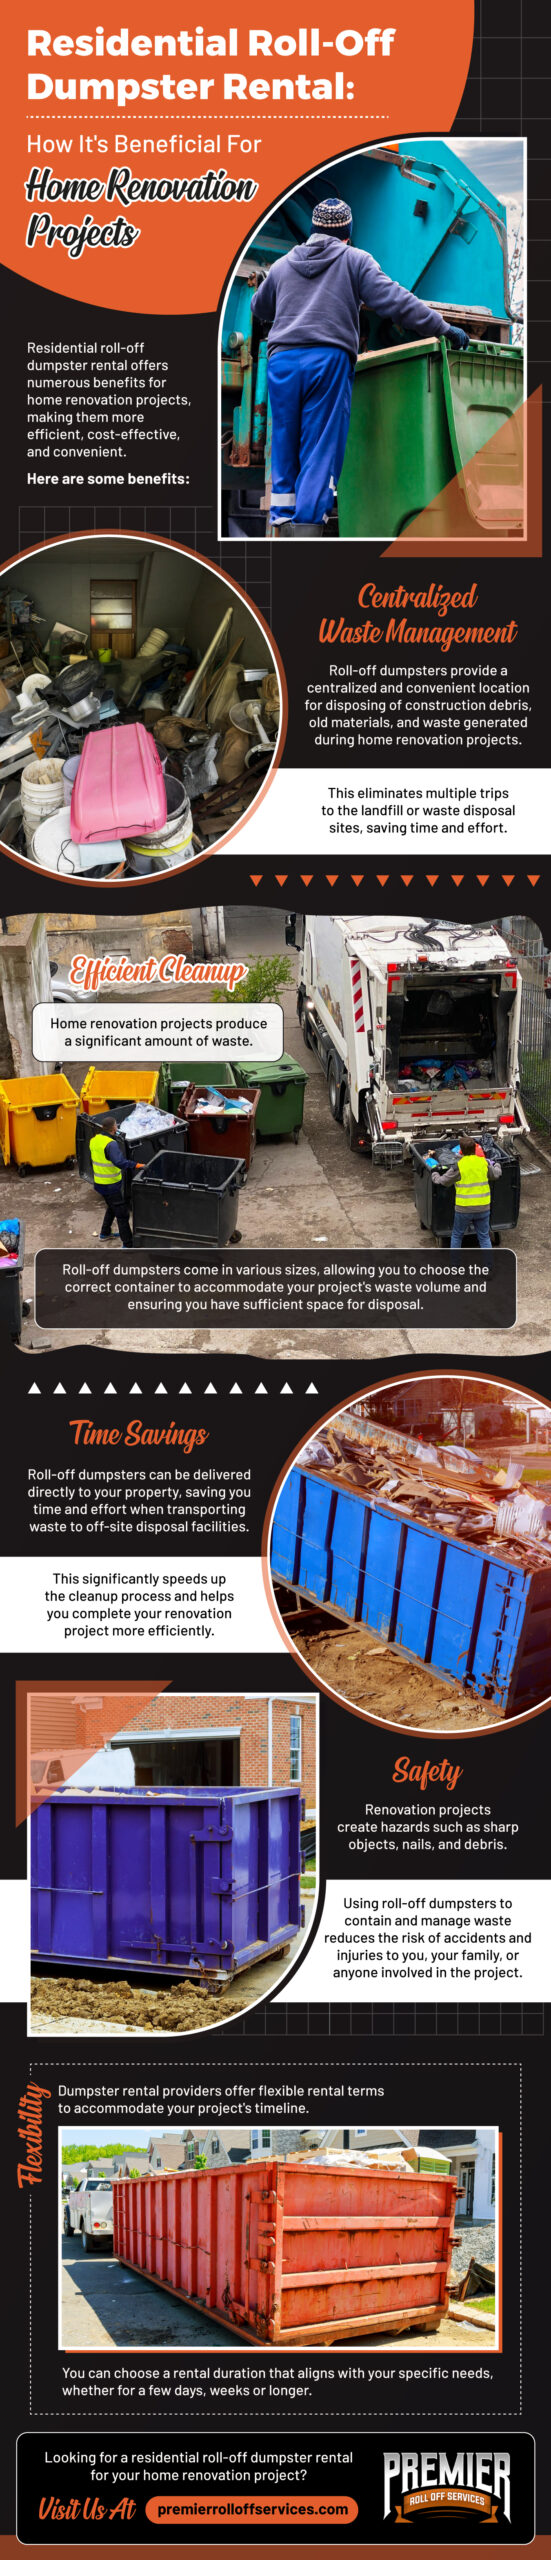 Residential Roll-Off Dumpster Rental: How It's Beneficial For Home Renovation Projects